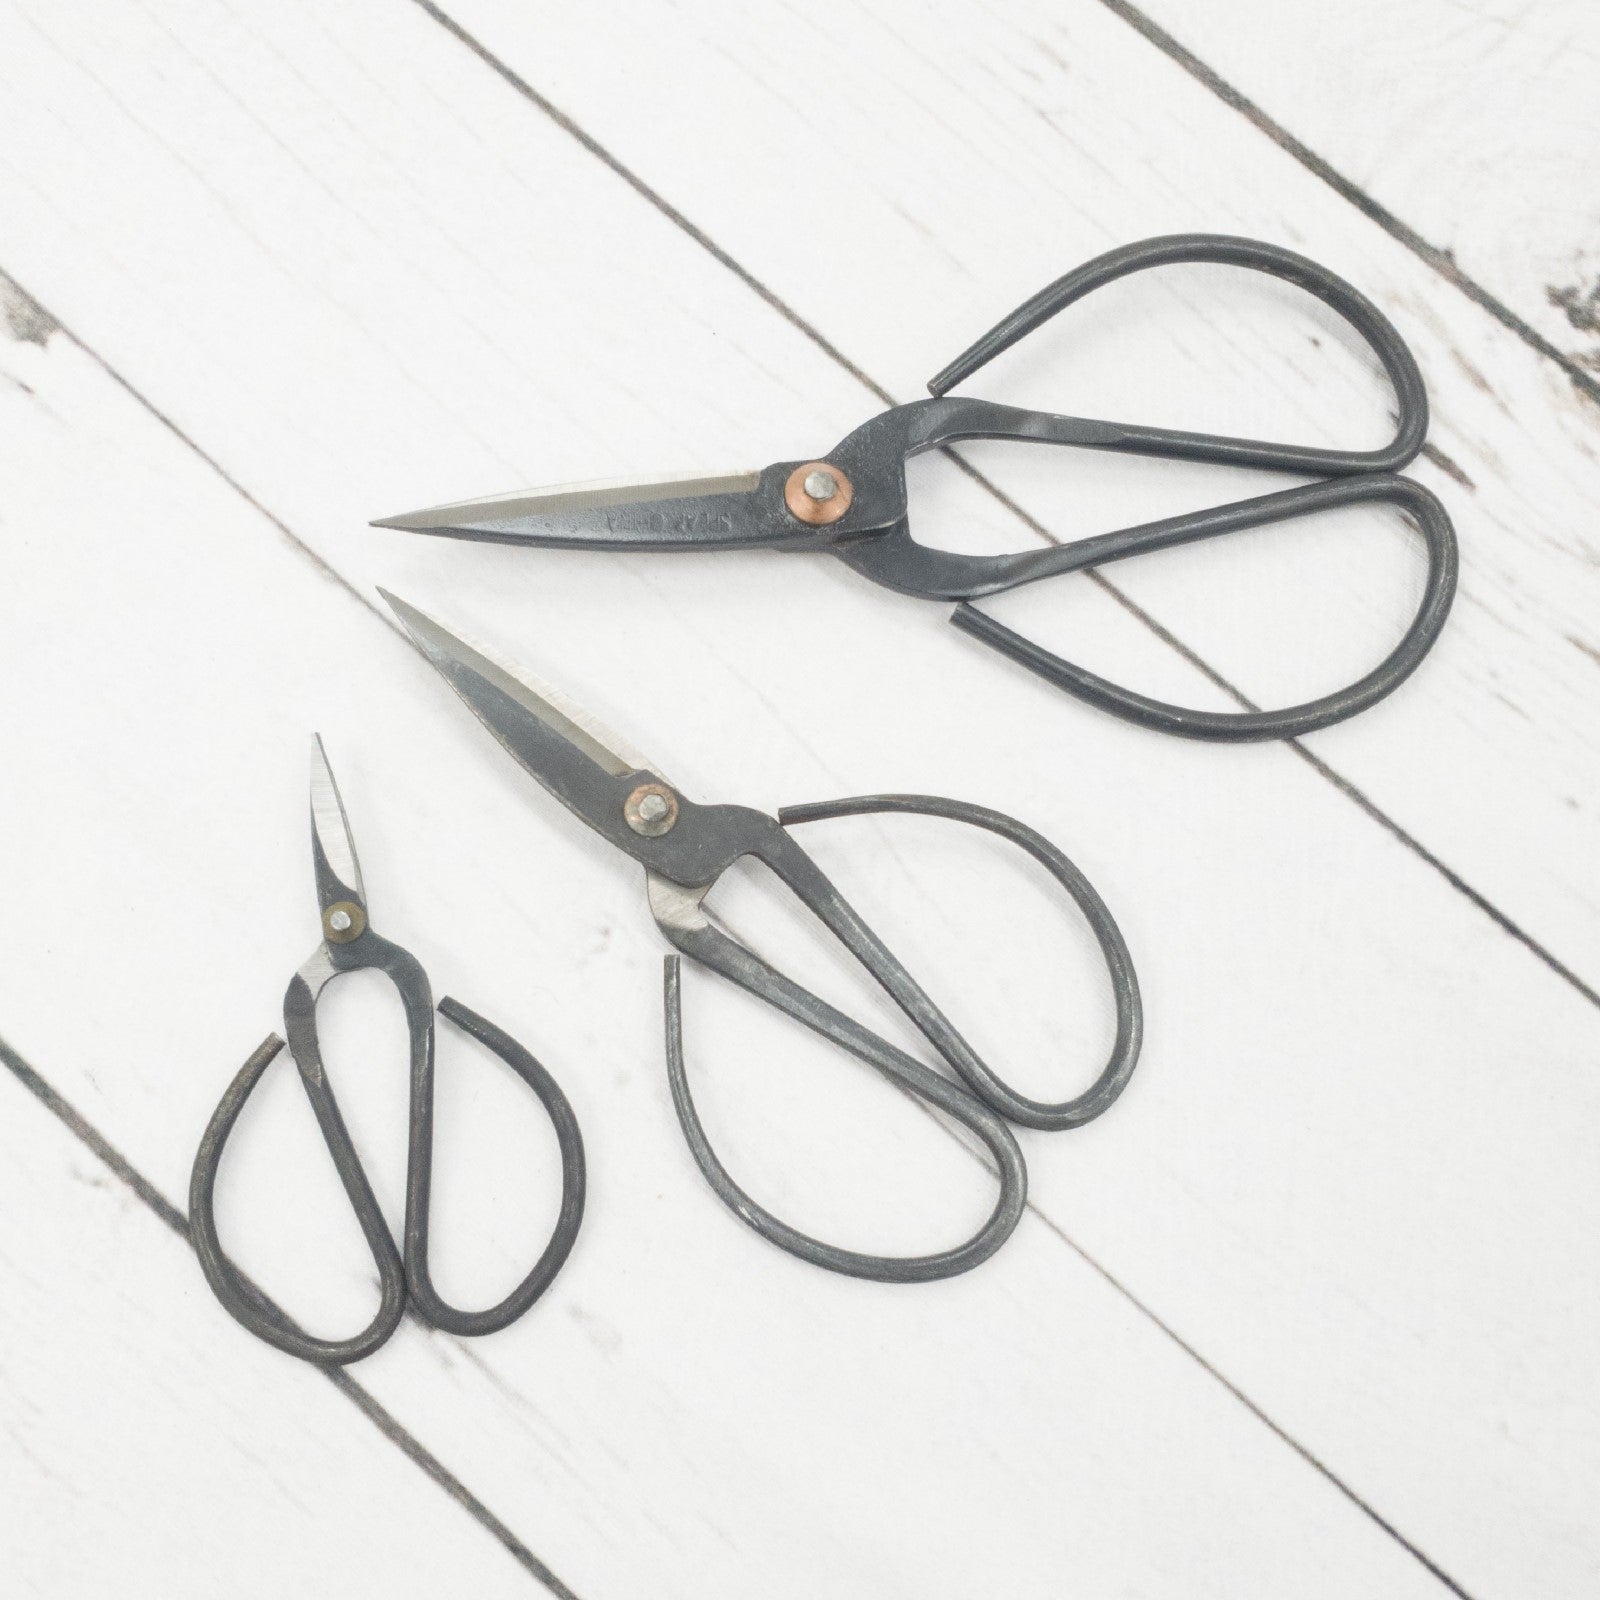 Vintage Scissors, Shears, and Snips